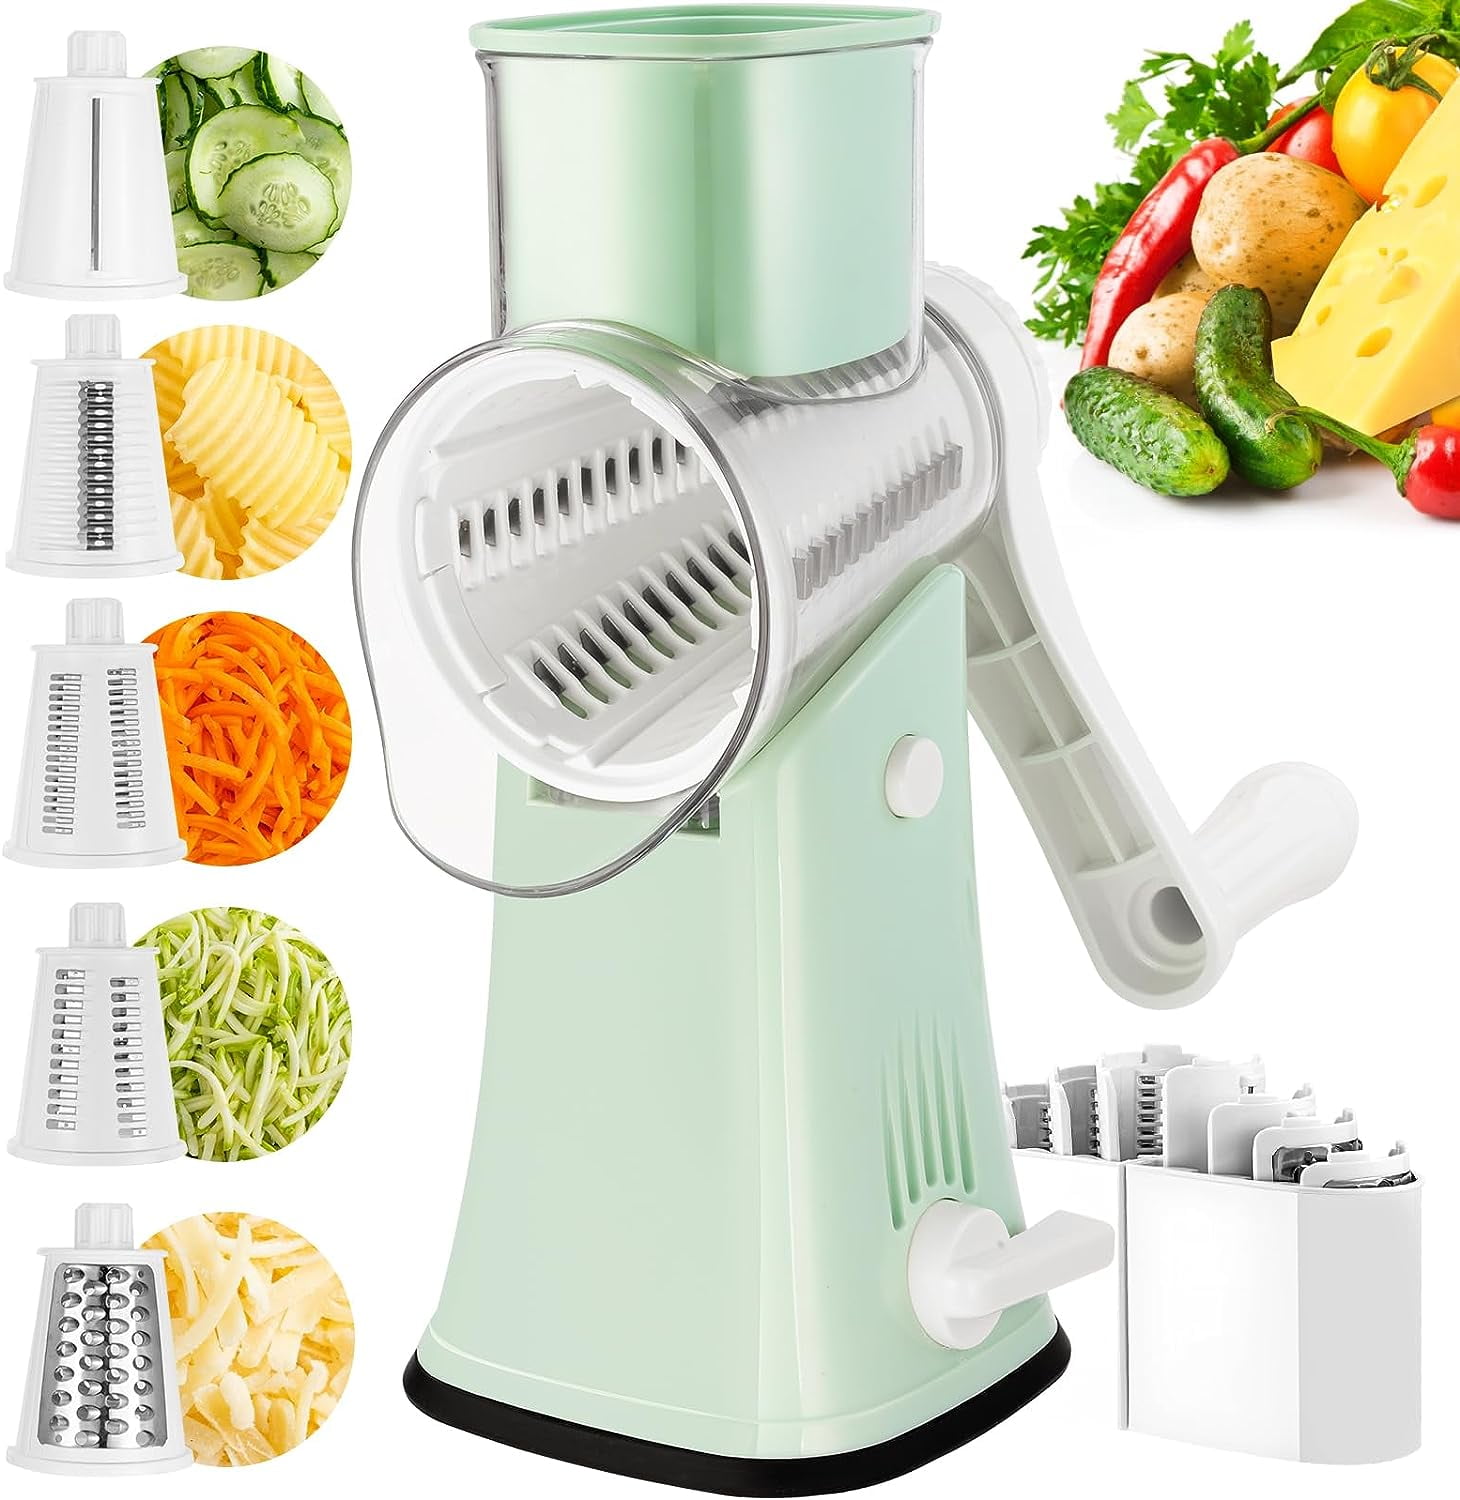 Manual Rotary Cheese Grater with Handle - Green, New